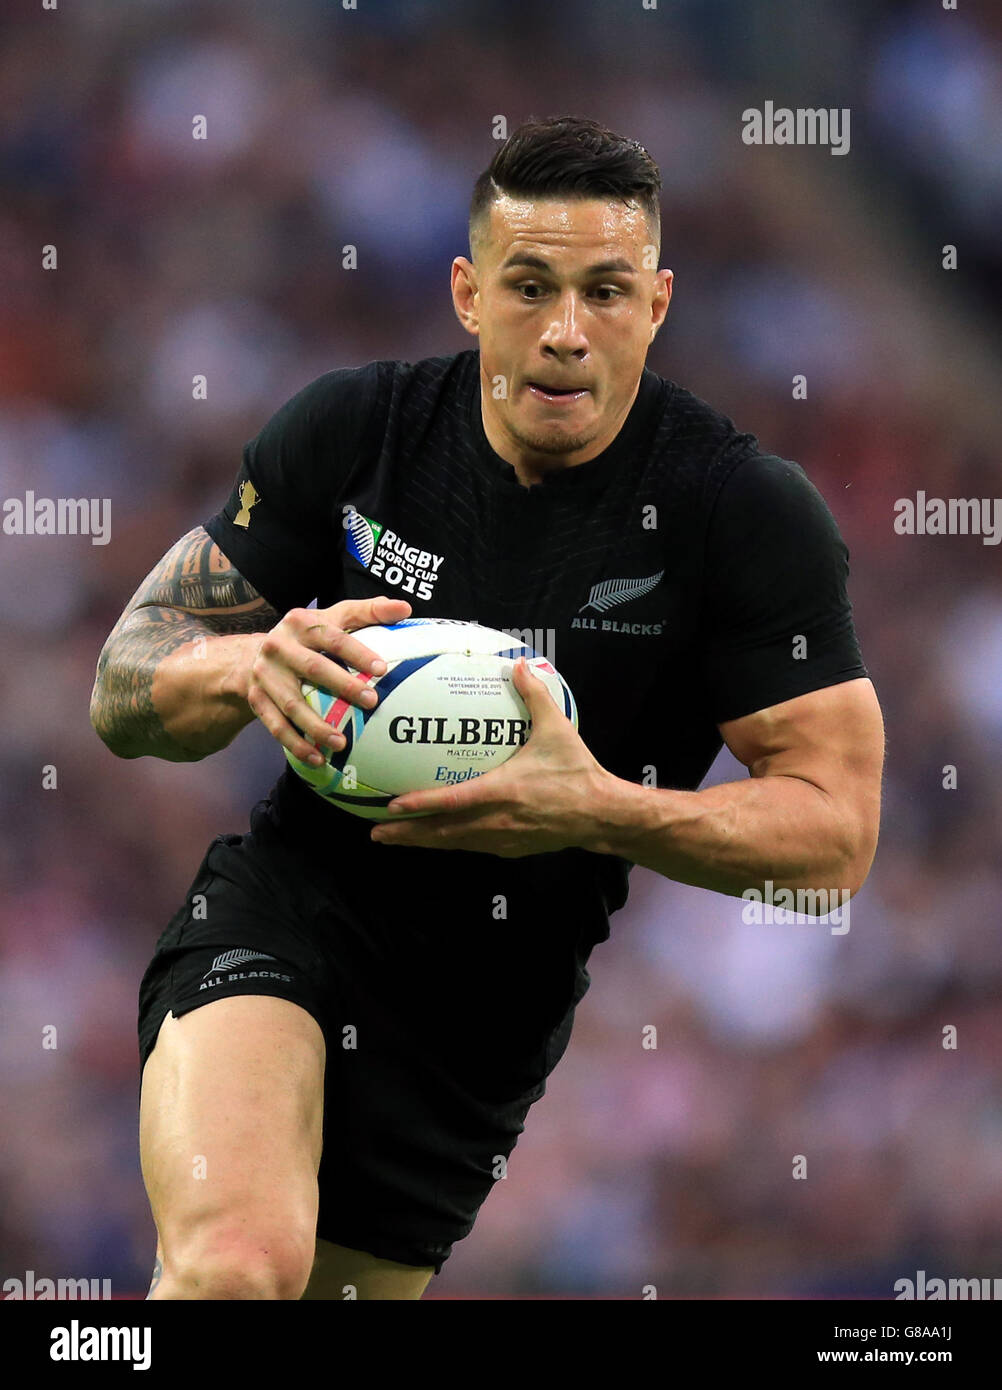 New Zealand's Sonny Bill Williams during the Rugby World Cup match at Wembley Stadium, London. PRESS ASSOCIATION Photo. Picture date: Sunday September 20, 2015. See PA story RUGBYU New Zealand. Photo credit should read: Mike Egerton/PA Wire. RESTRICTIONS: Strictly no commercial use or association without RWCL permission. Still image use only. Use implies acceptance of Section 6 of RWC 2015 T&Cs at: http://bit.ly/1MPElTL Call +44 (0)1158 447447 for further info. Stock Photo